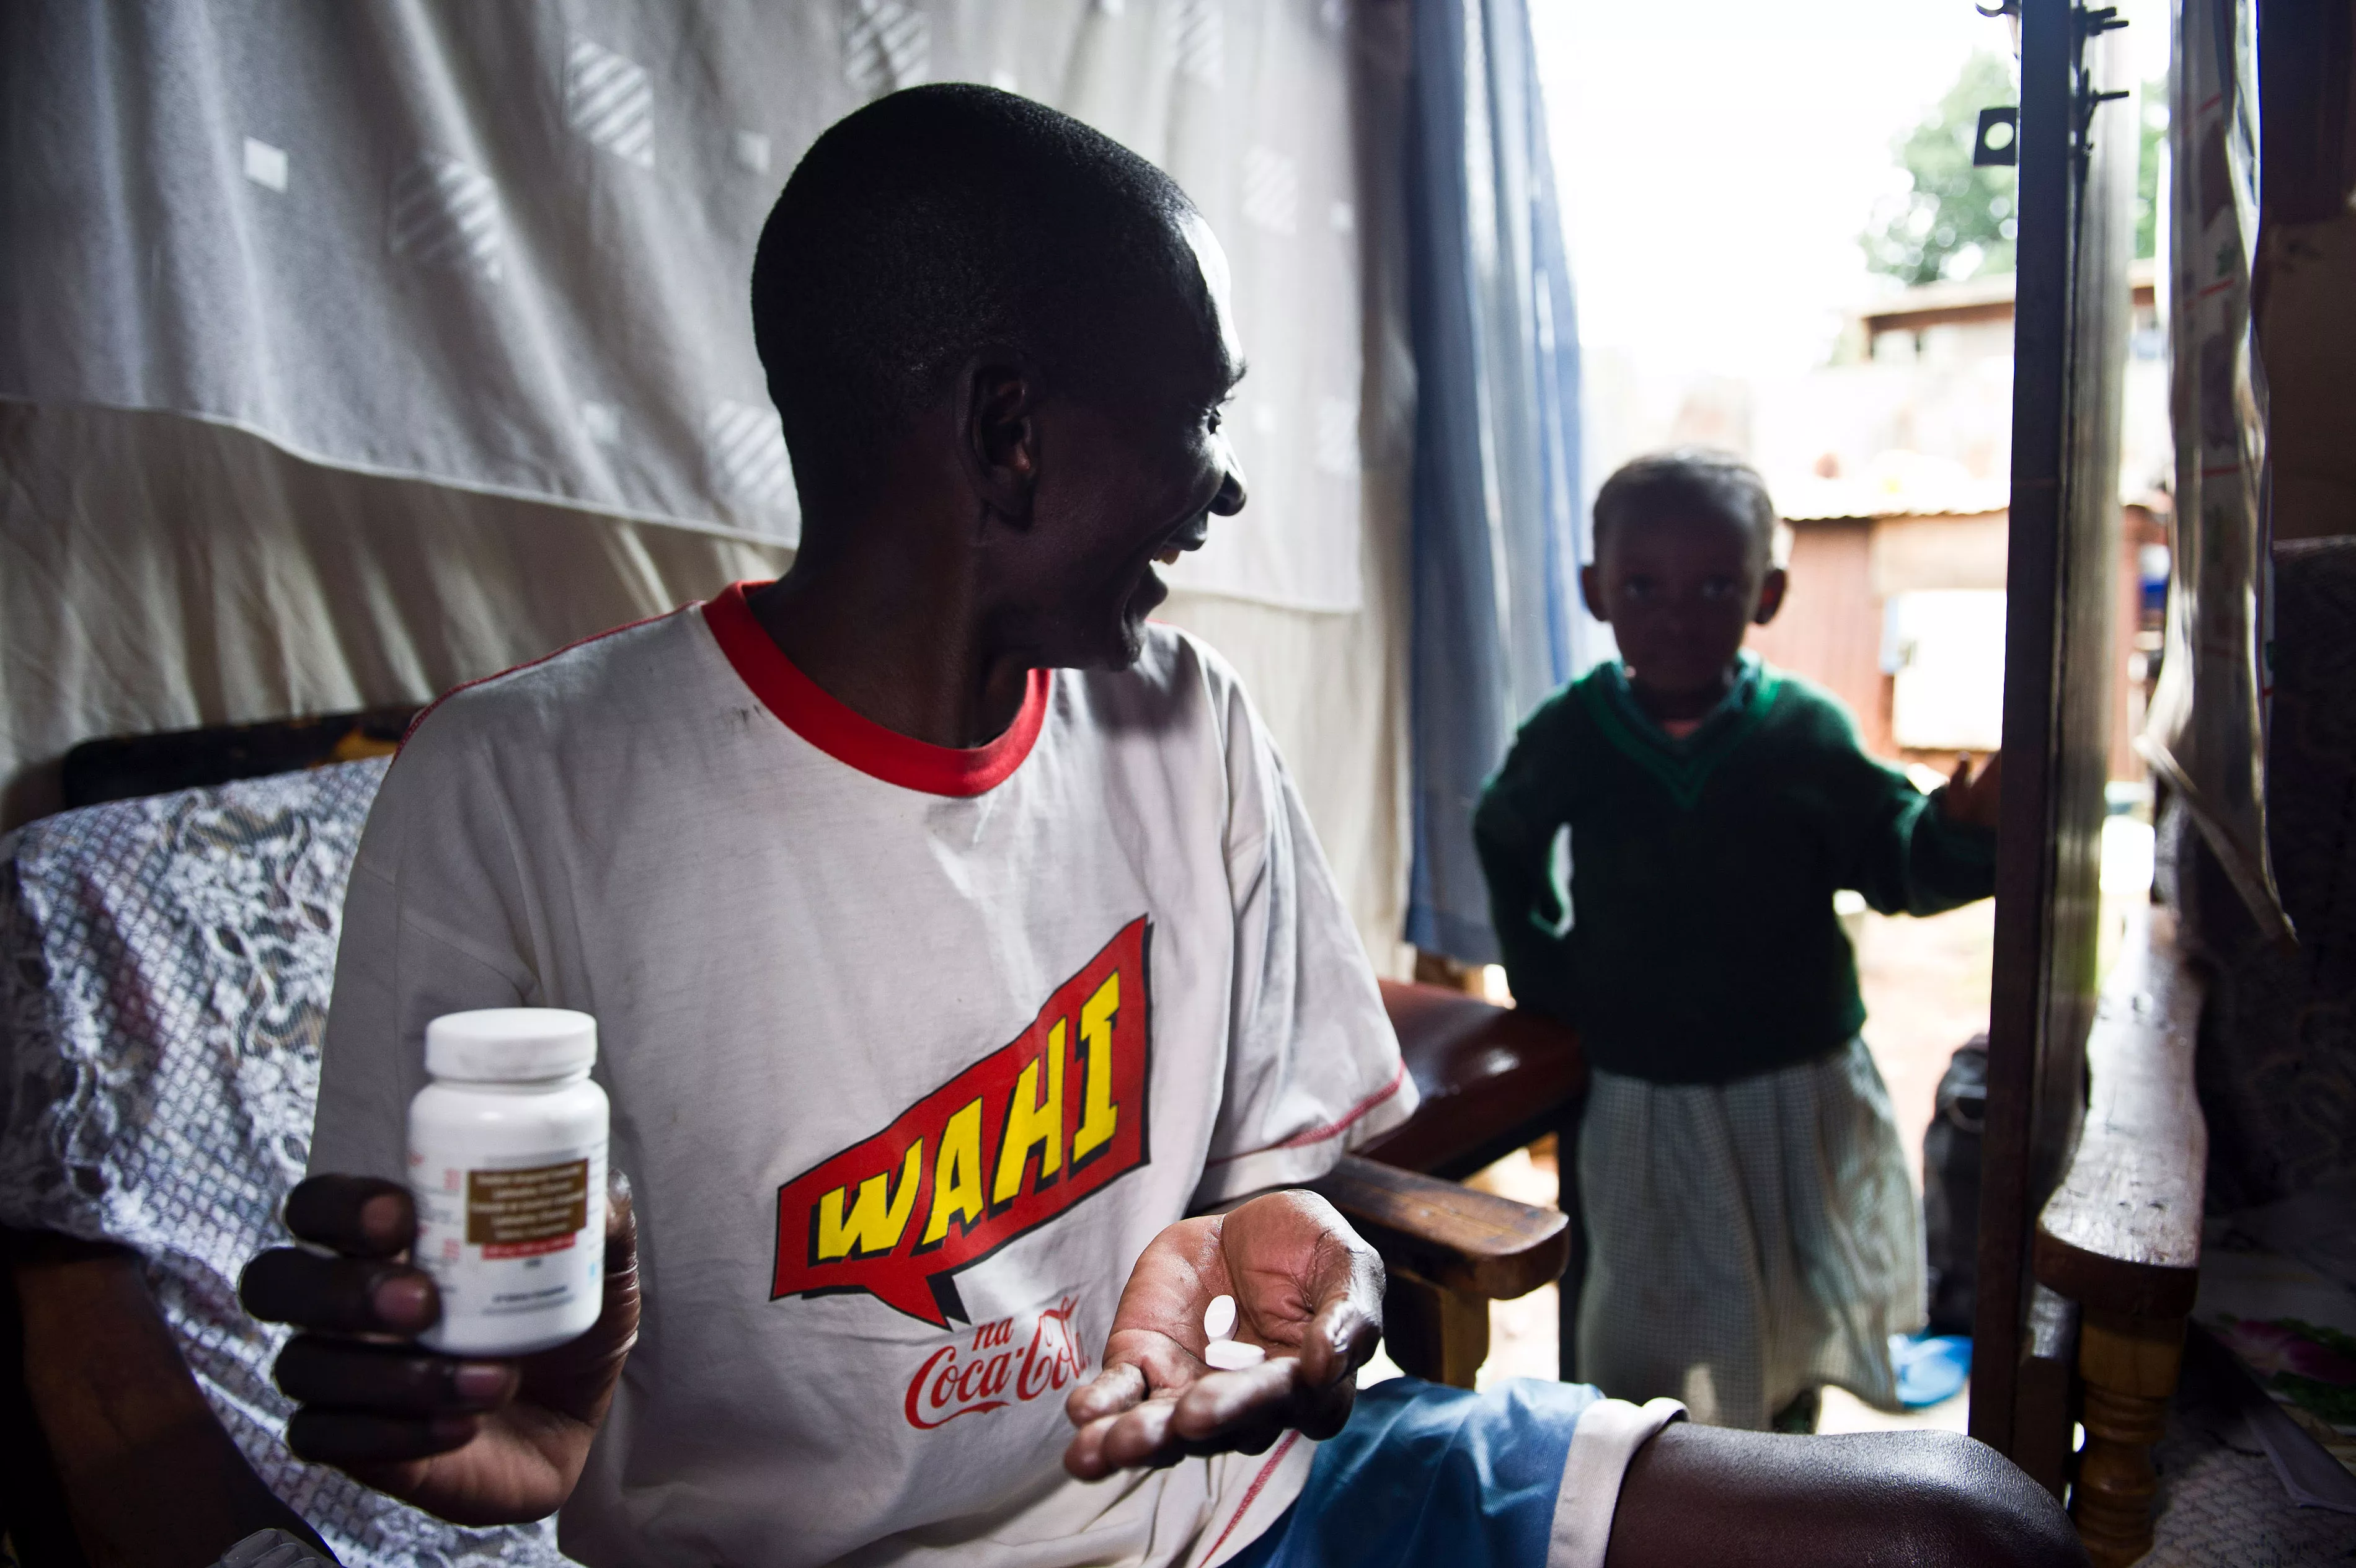 Charles Sako is 41 and lives with his partner and three-year old daughter in Kibera, a deprived area of the Kenyan capital, Nairobi. Charles is HIV positive and is being treated at an MSF clinic in Kibera. 